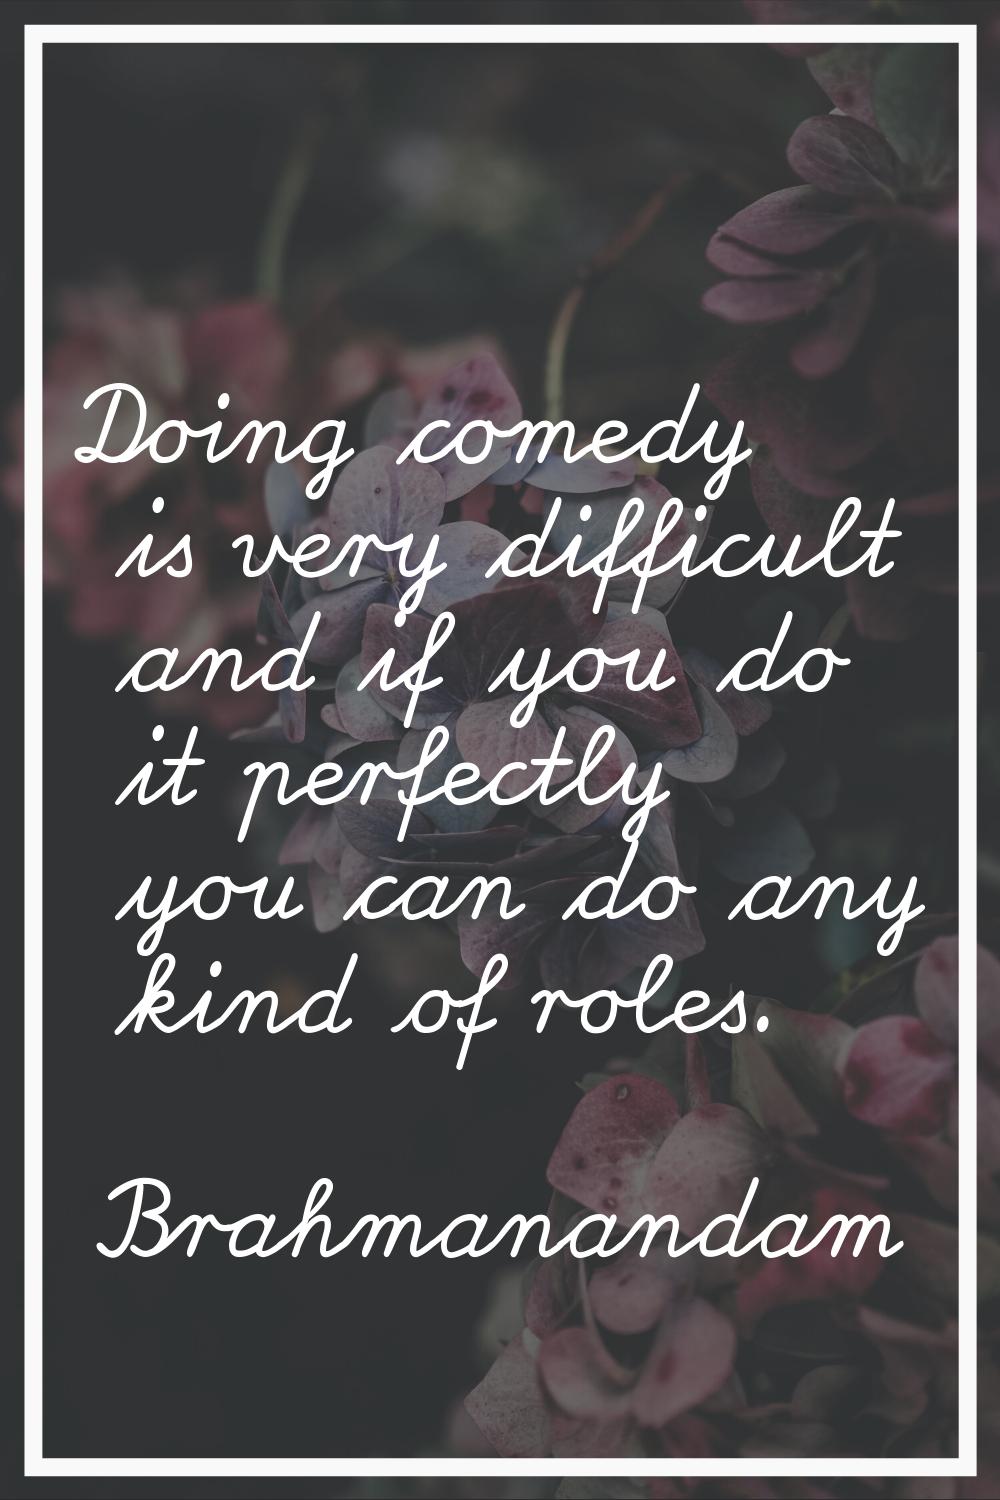 Doing comedy is very difficult and if you do it perfectly you can do any kind of roles.